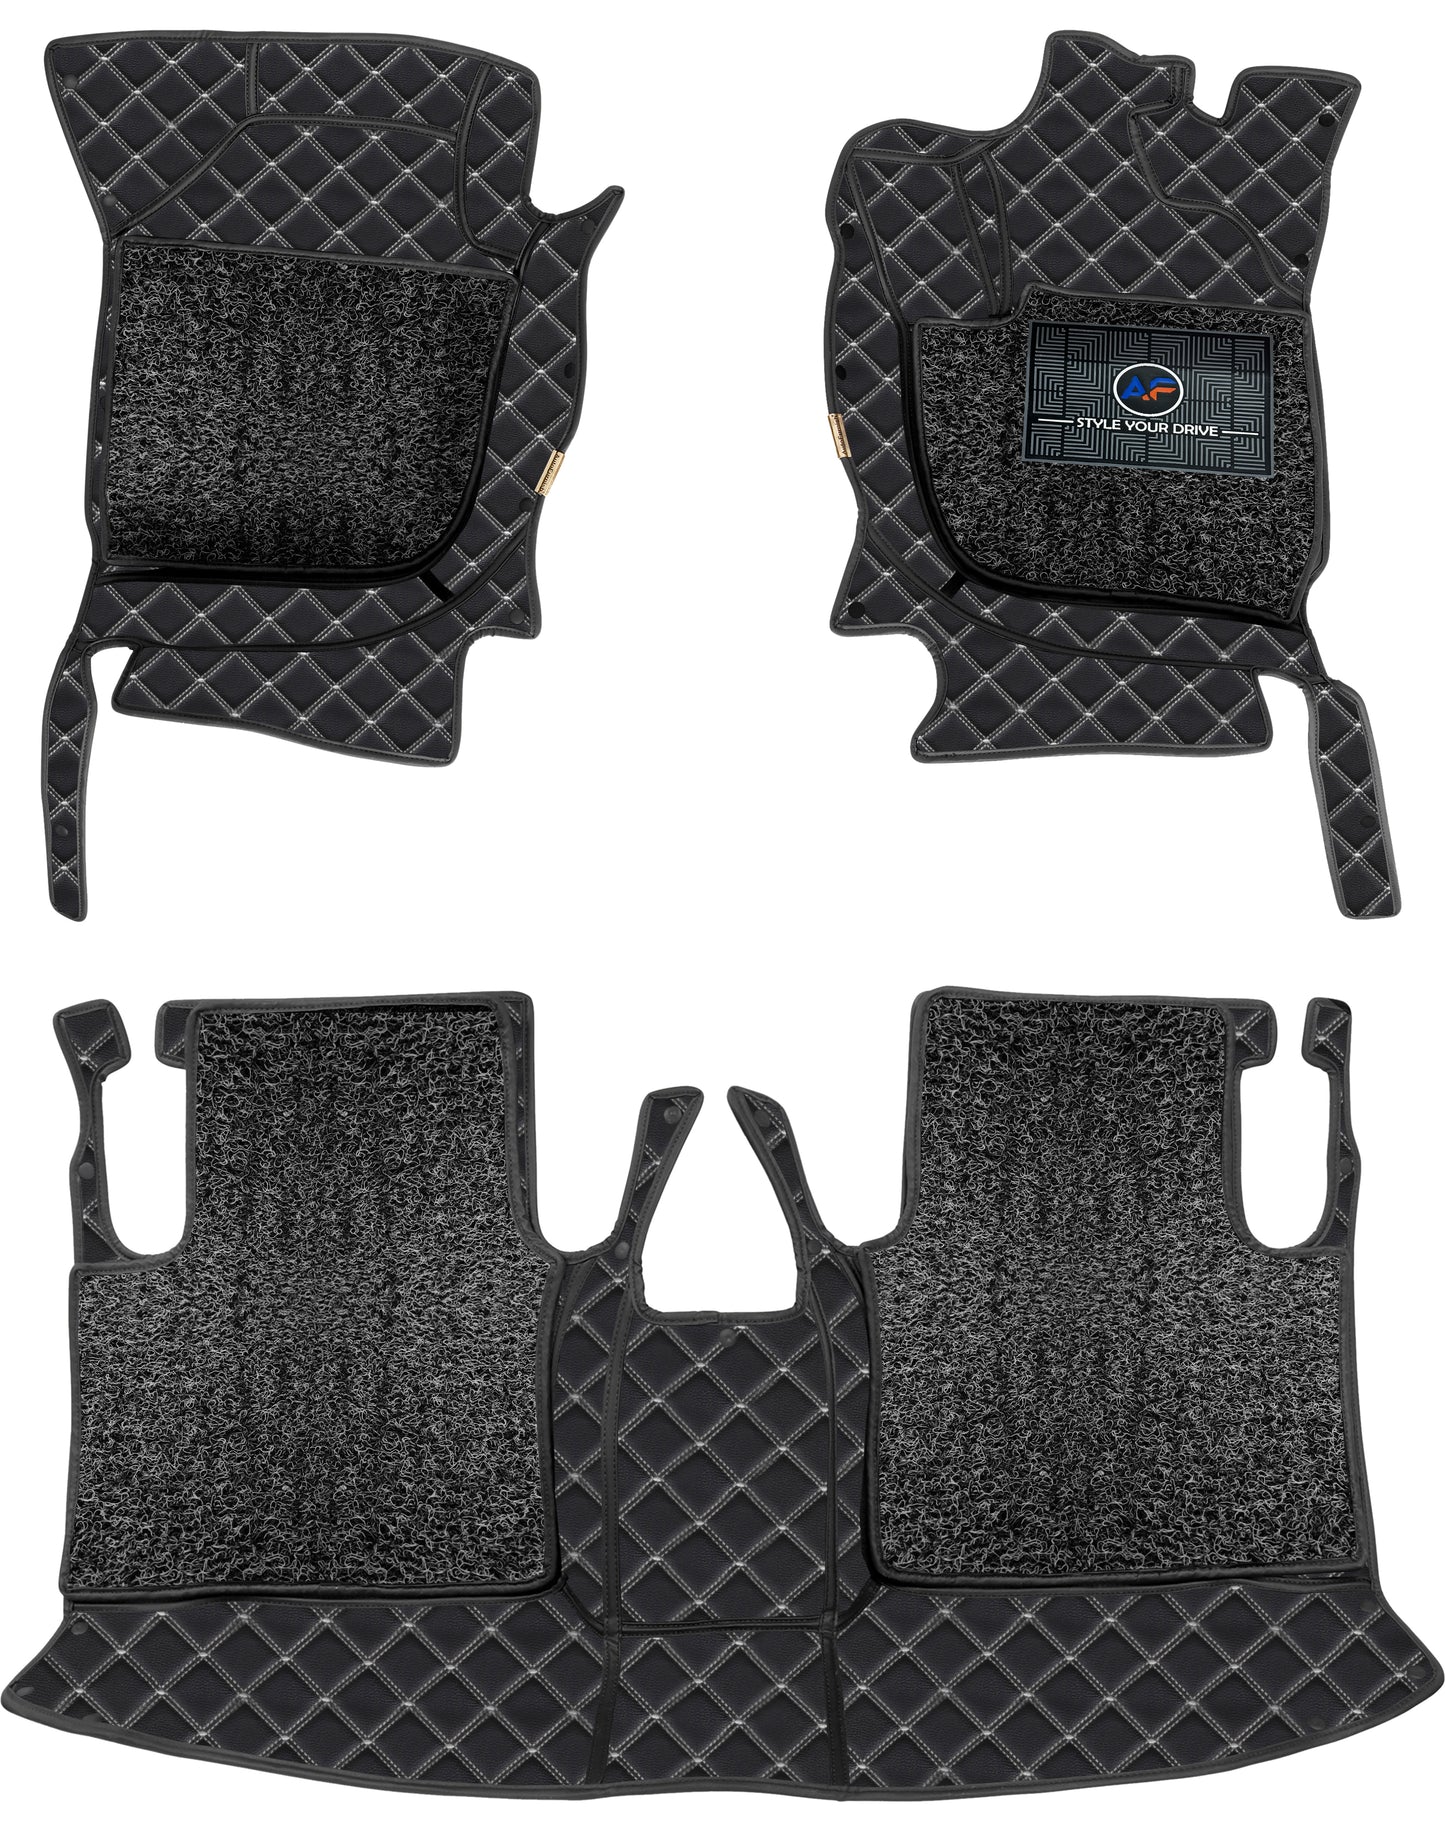 Hyundai Tucson 2017-21-7D Luxury Car Mat, All Weather Proof, Anti-Skid, 100% Waterproof & Odorless with Unique Diamond Fish Design (24mm Luxury PU Leather, 2 Rows)